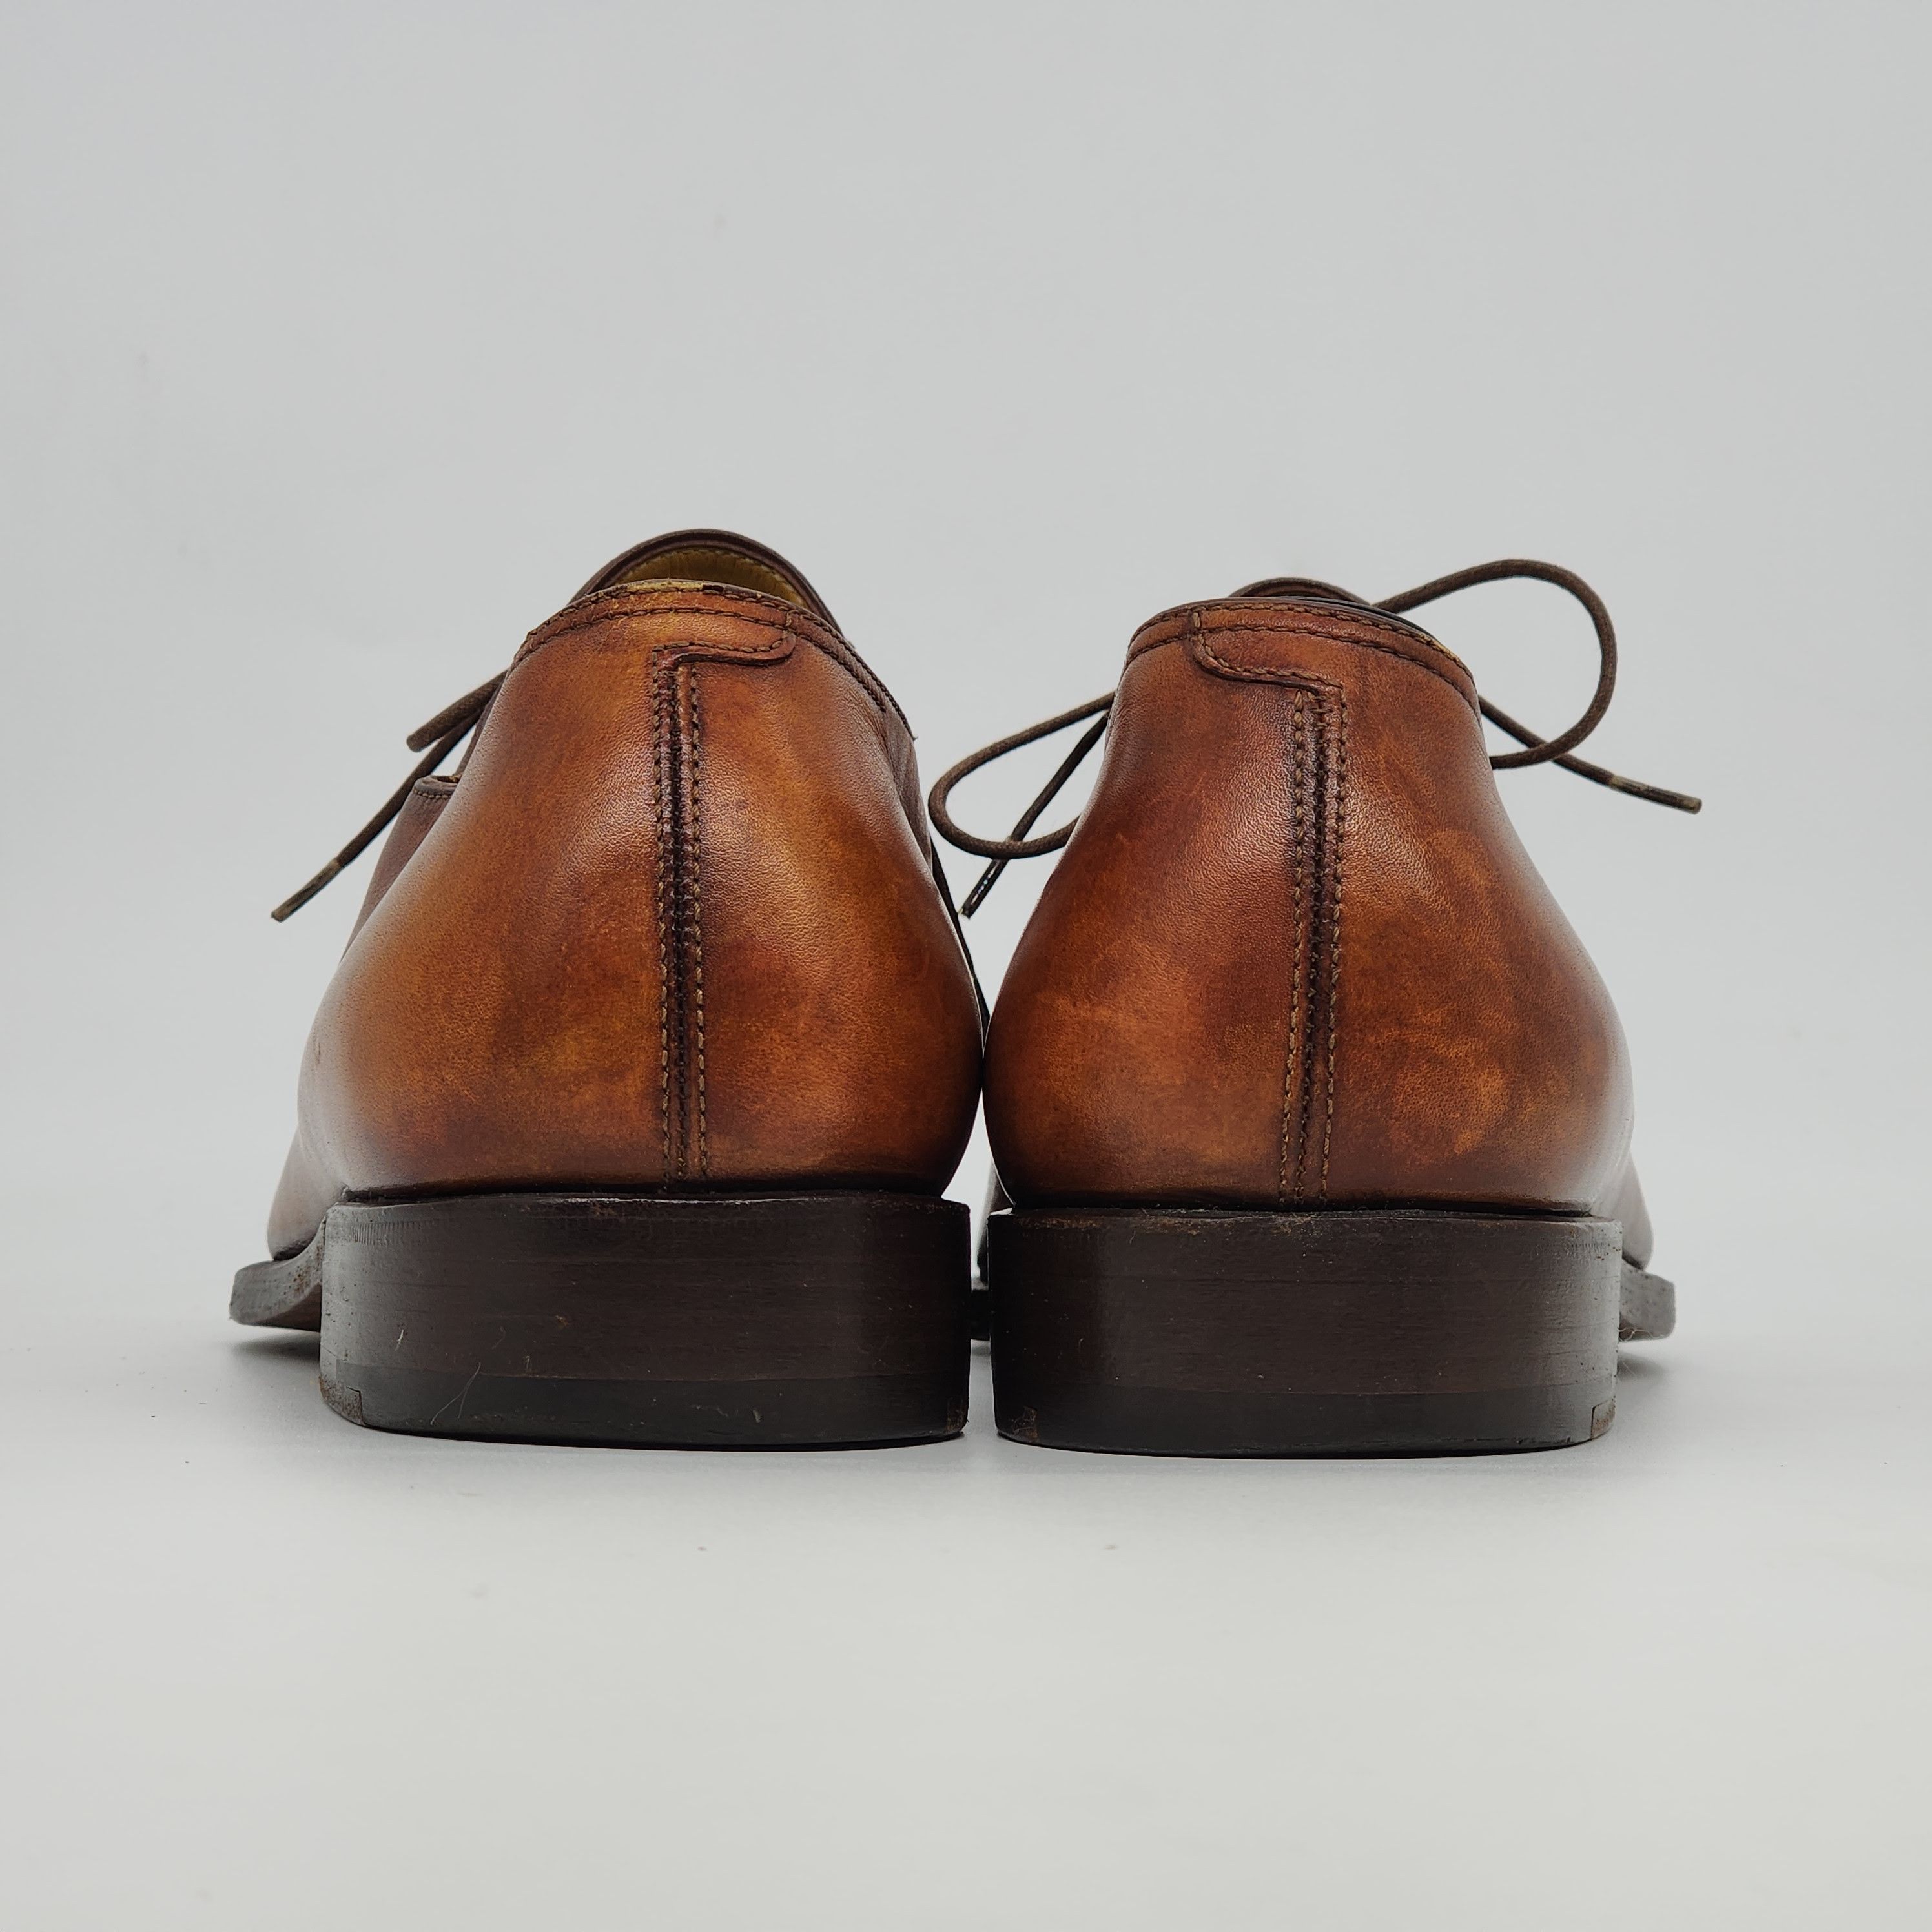 Berluti - Stitched Detail Leather Oxford Shoes - 7